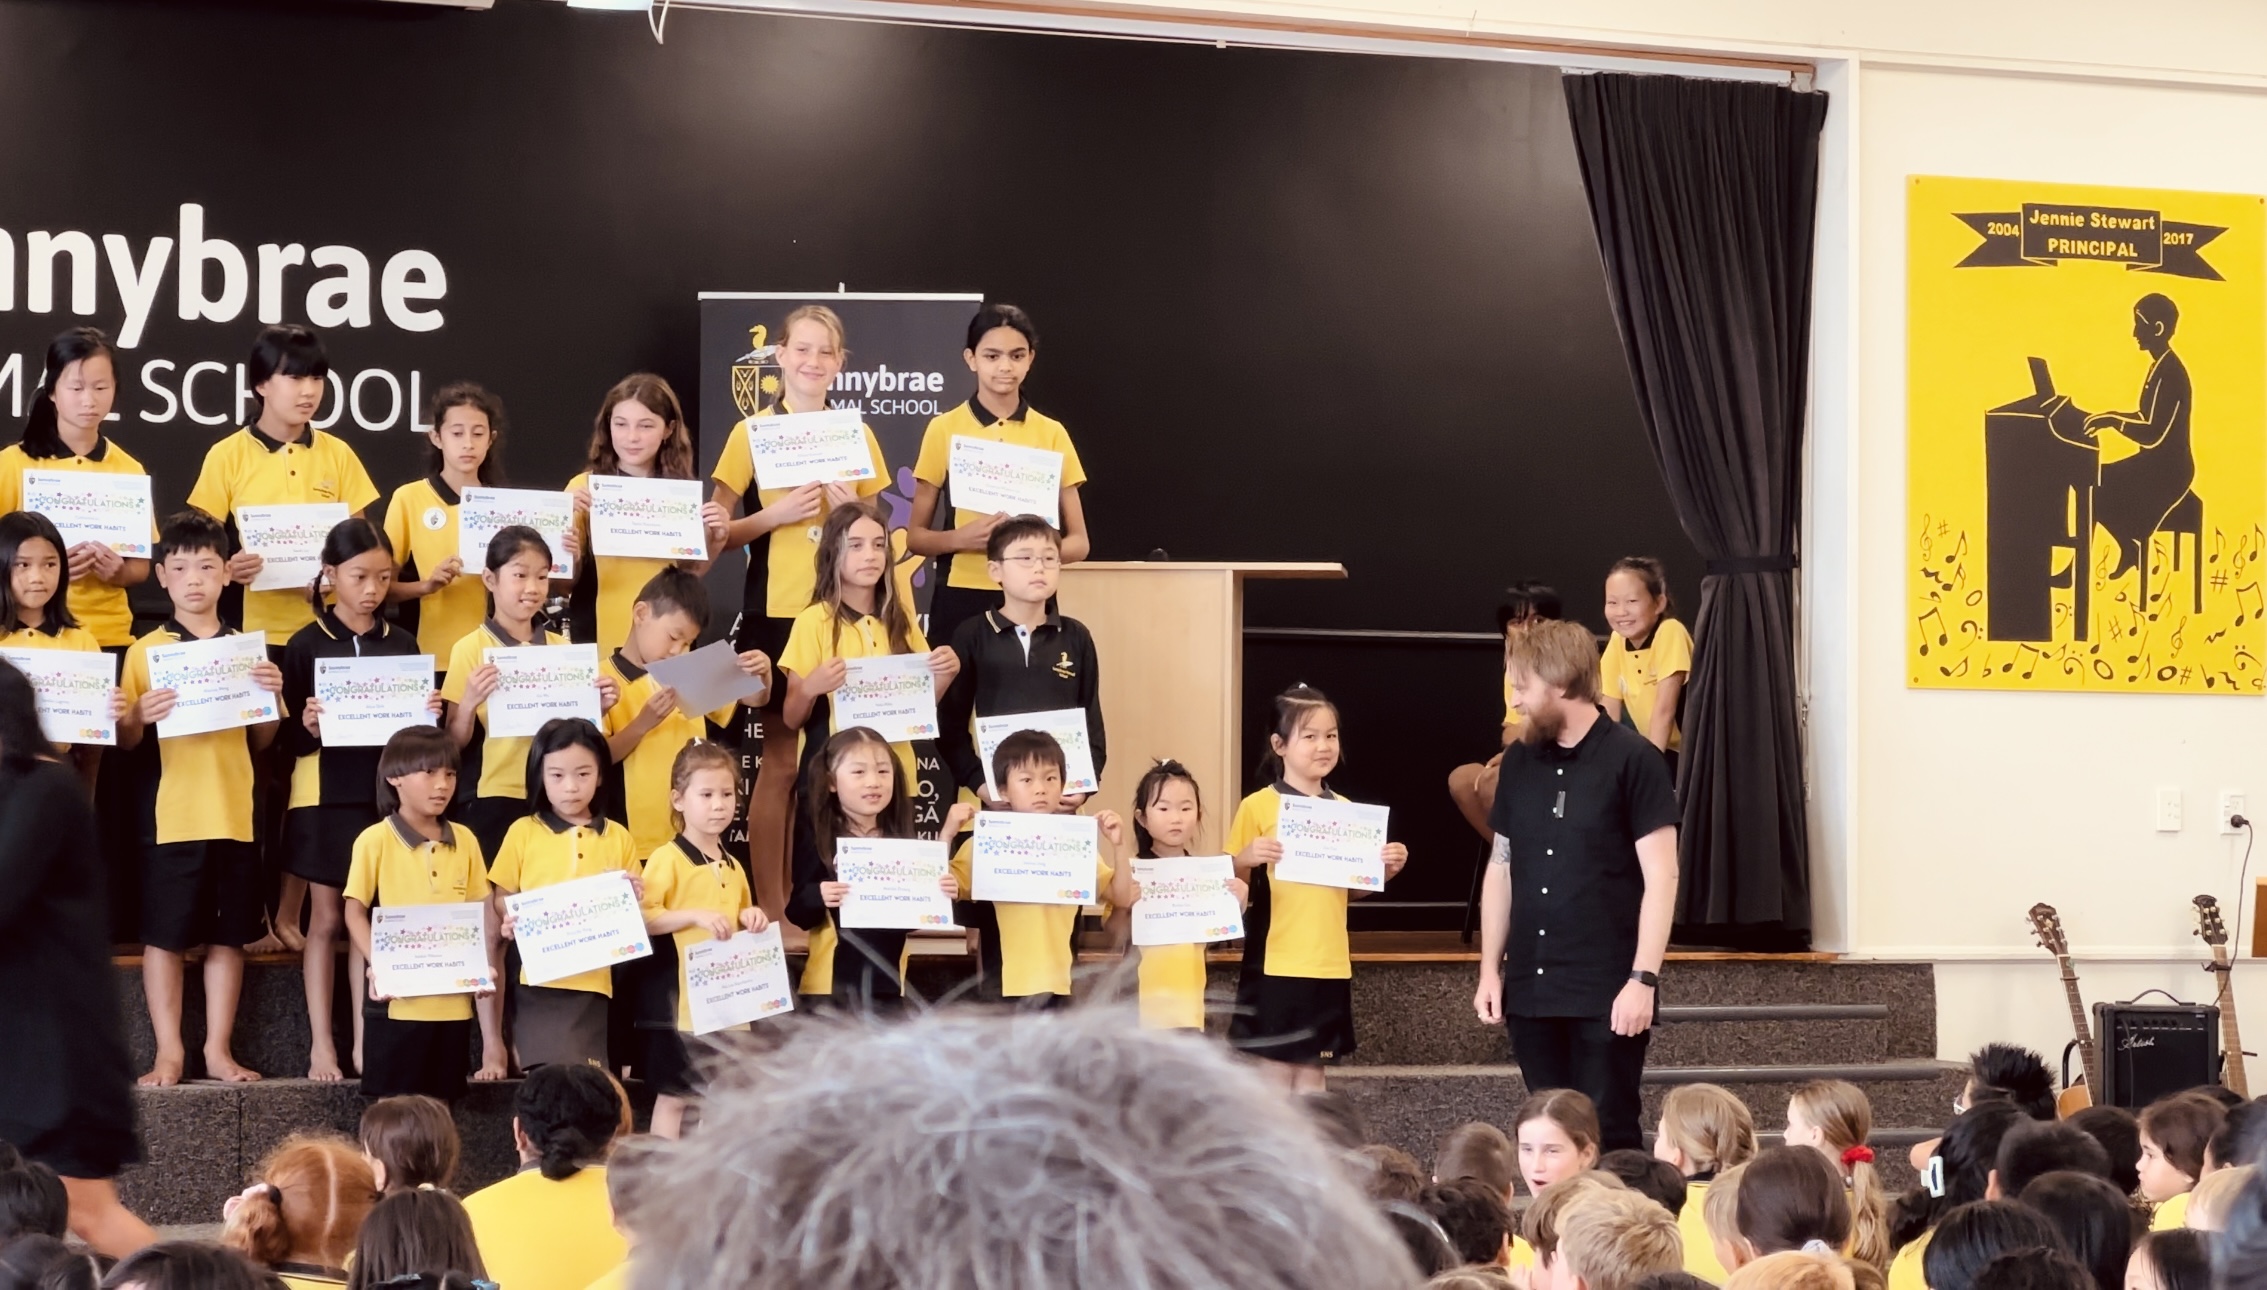 My daughter's school prize giving assembly